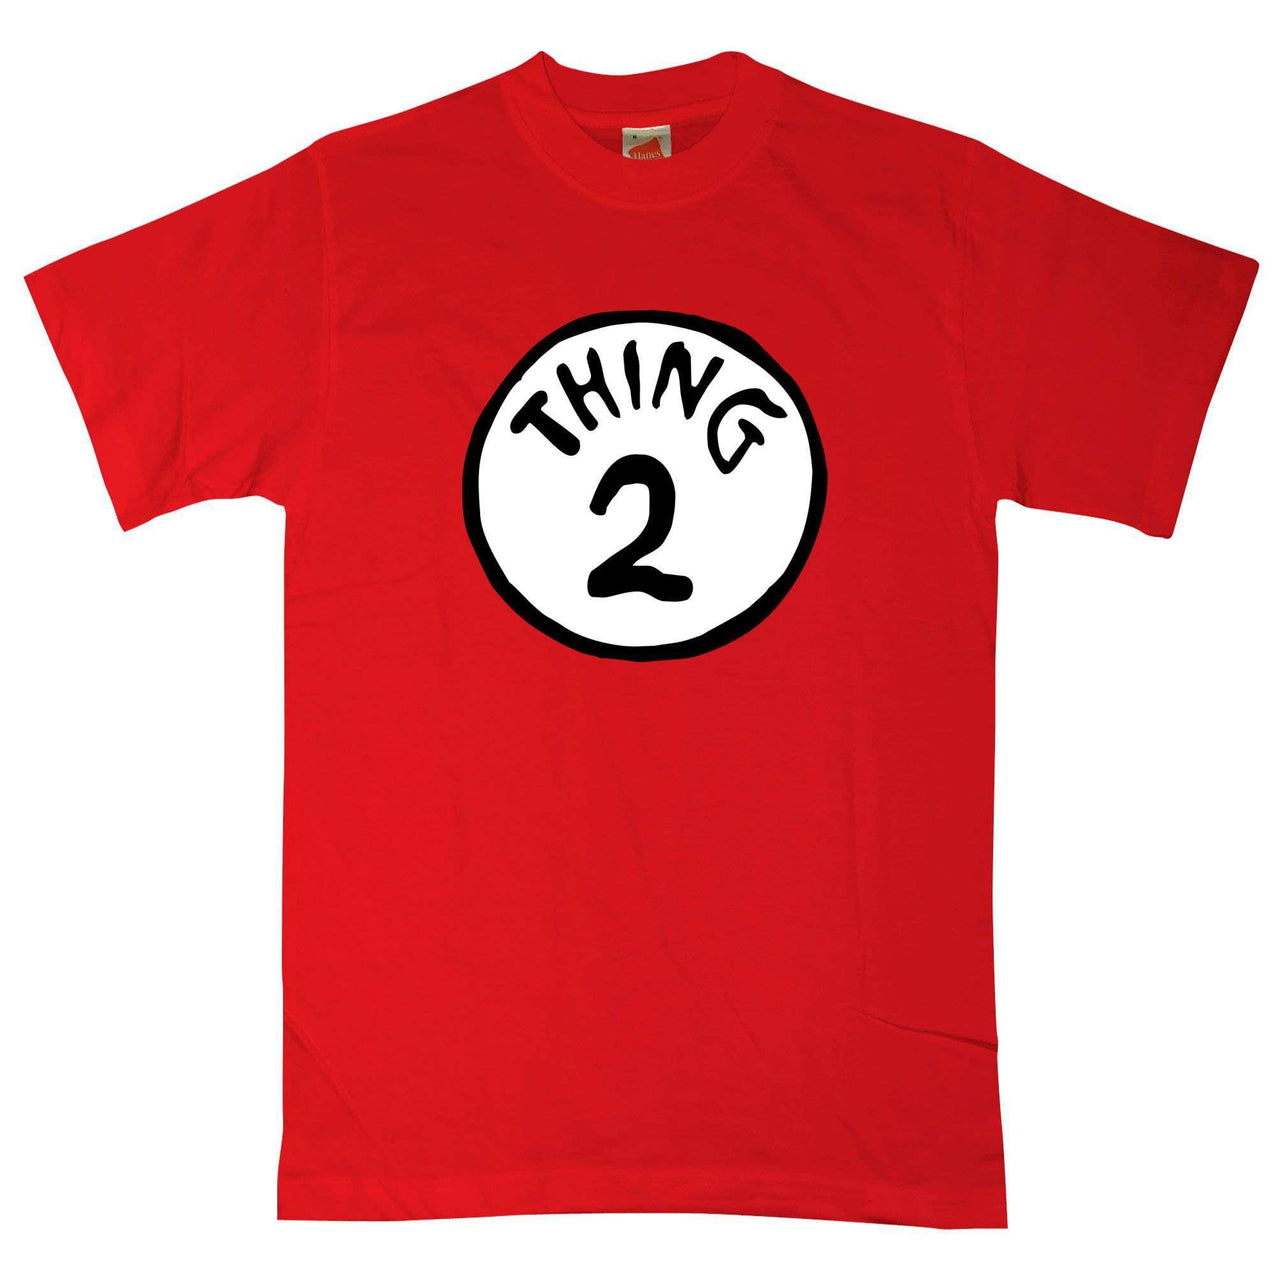 Cat In The Hat Thing 2 Graphic T-Shirt For Men 8Ball